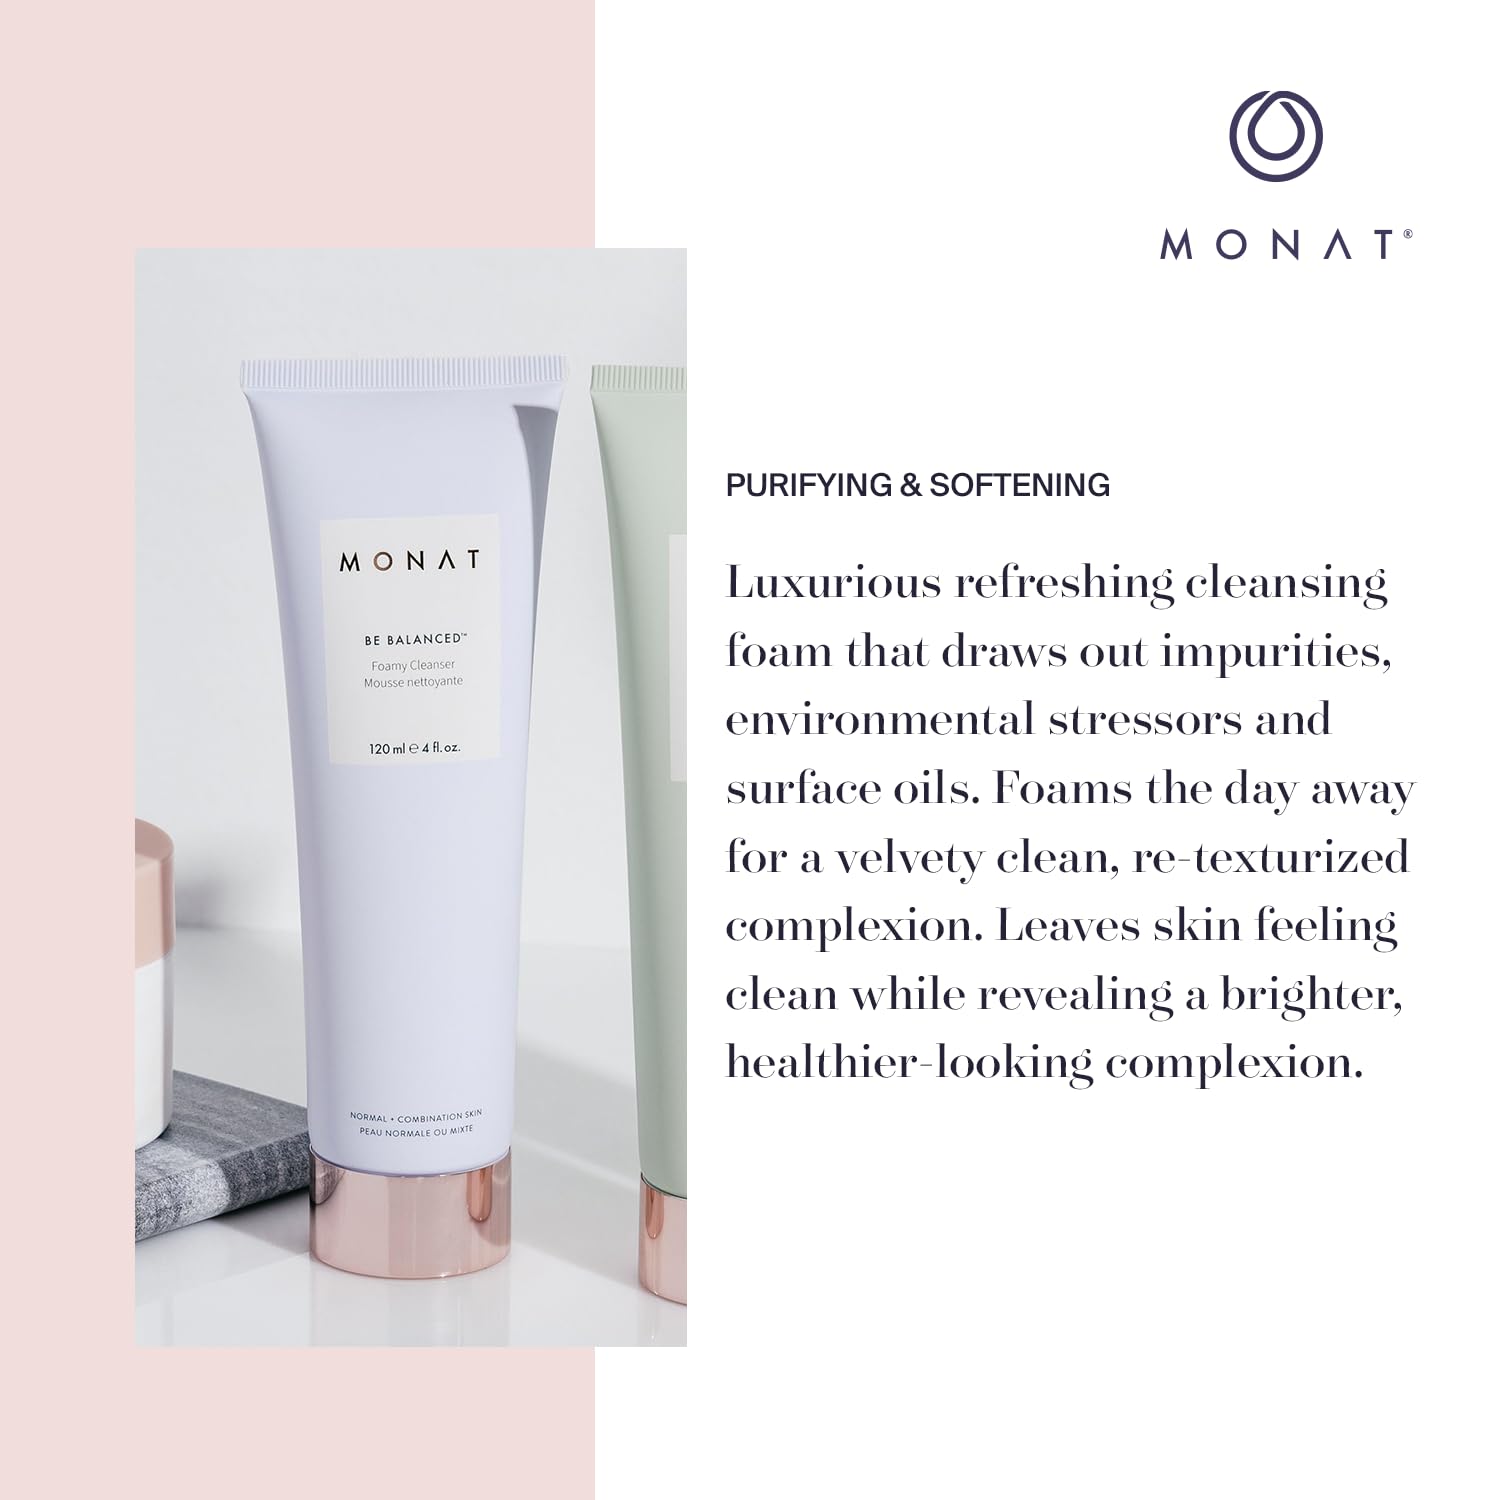 MONAT Be Balanced Foamy Cleanser - Purifying & Softening Foaming Facial Cleanser. Skin-Smoothing Antioxidants and Natural Fruit Acids Foaming Face Wash. Cleansing Foam - Net Wt. 120 ml / 4.0 fl. oz. : Beauty & Personal Care